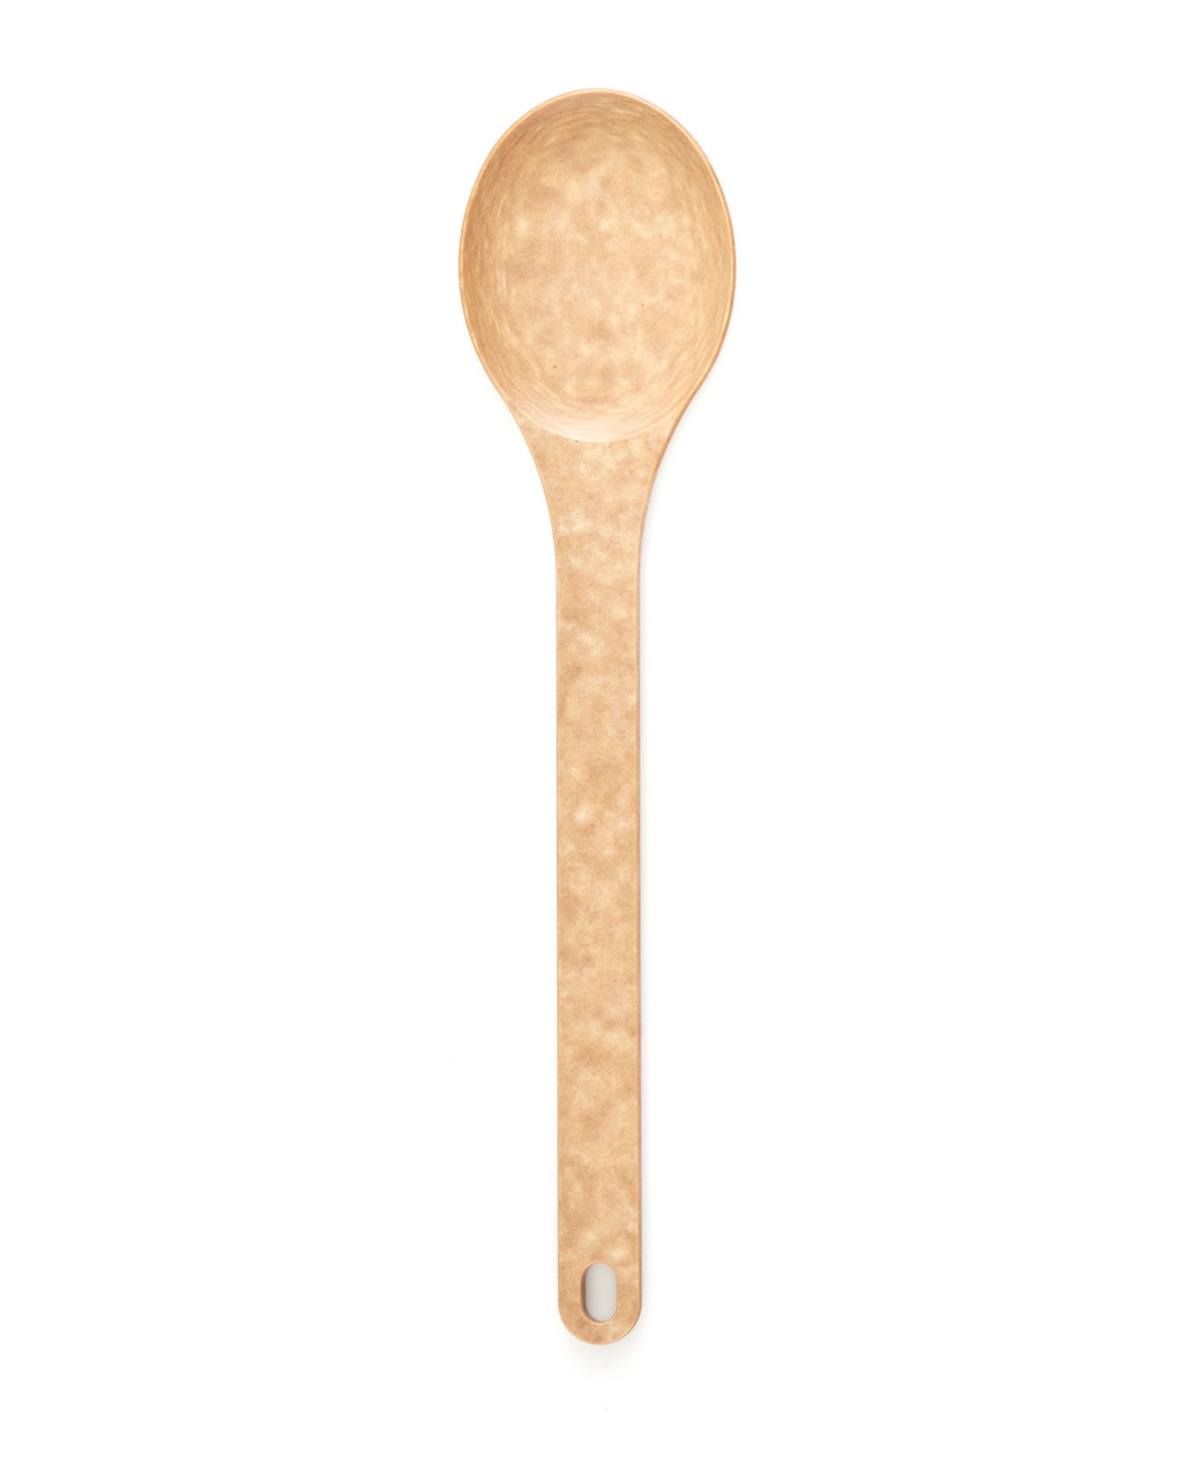 Epicurean Kitchen Series Utensil, Large Spoon 13" In Natural